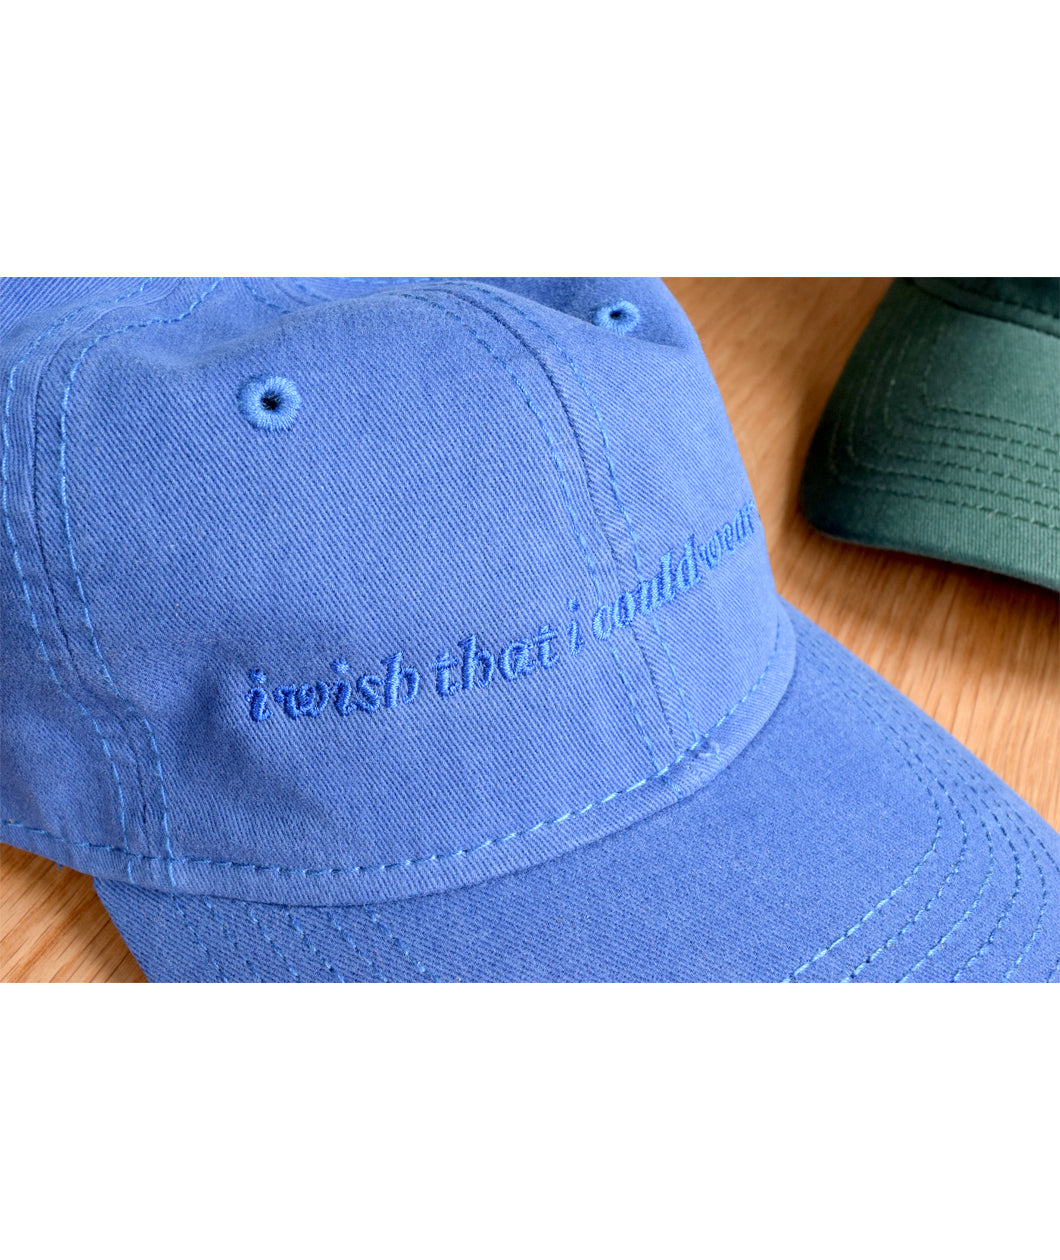 Close up of blue ball cap with lowercase embroidered words saying 